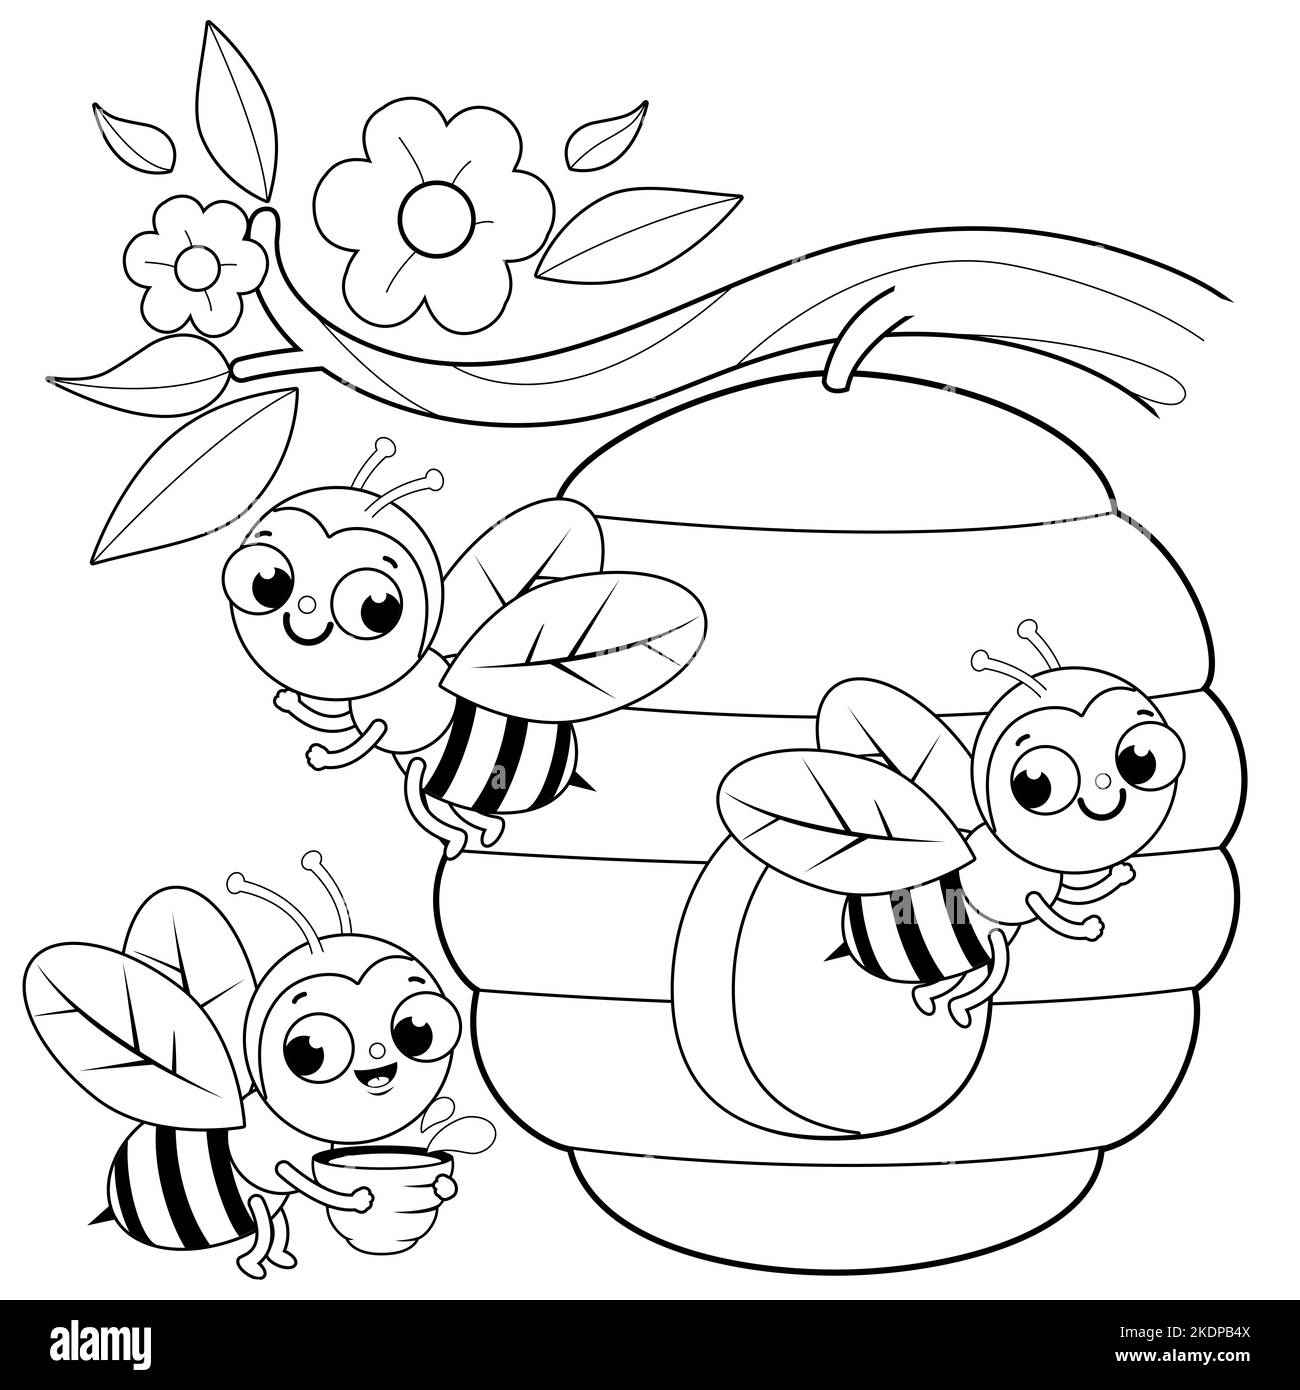 Busy bees flying around a beehive. Black and white coloring page Stock Photo